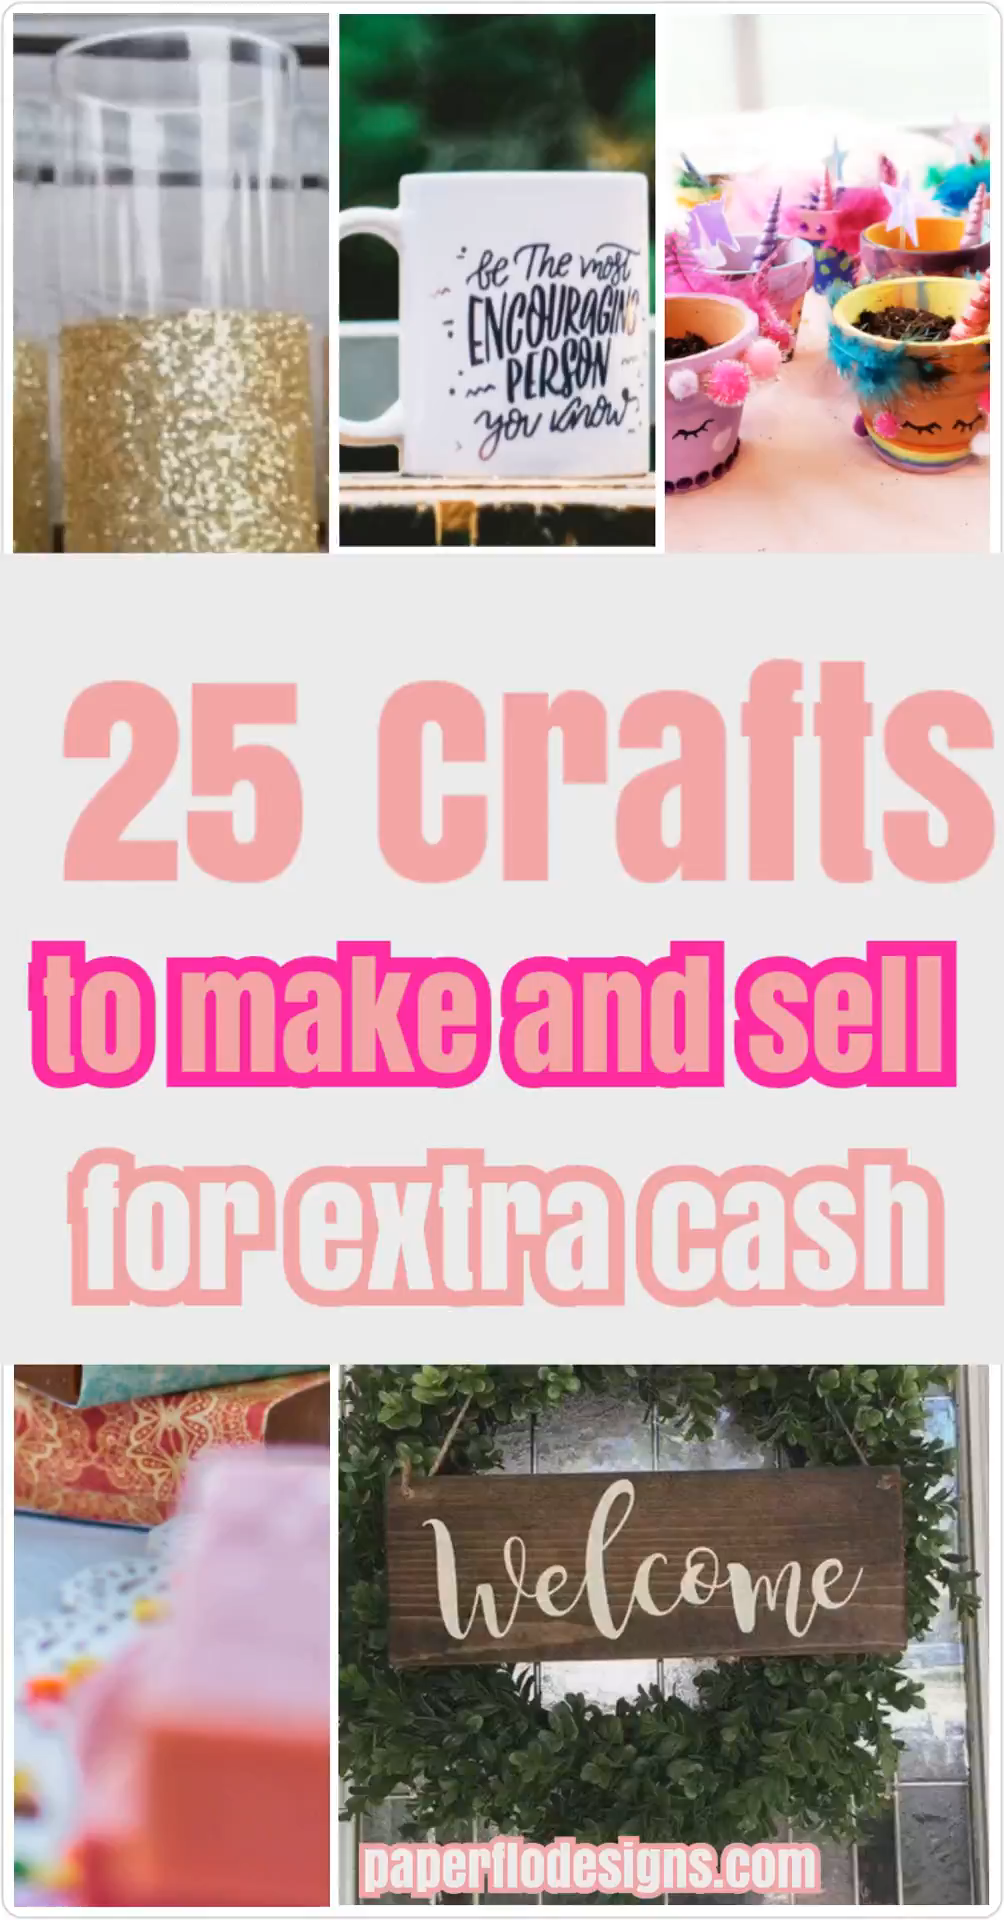 25 Crafts to make and sell for extra cash - 25 Crafts to make and sell for extra cash -   17 diy Gifts for women ideas